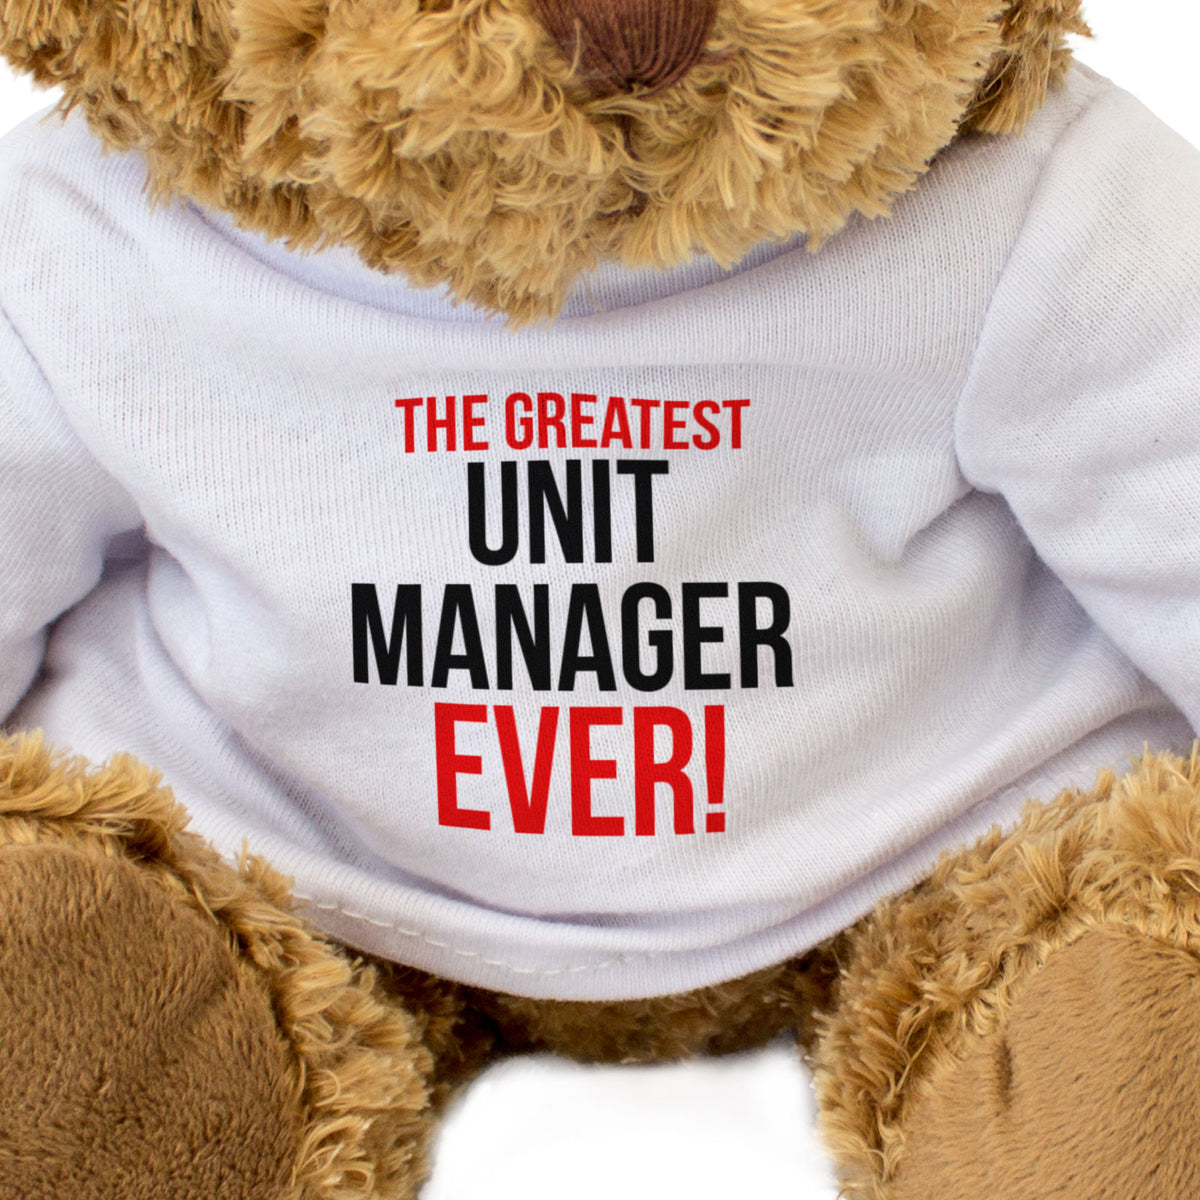 The Greatest Unit Manager Ever - Teddy Bear